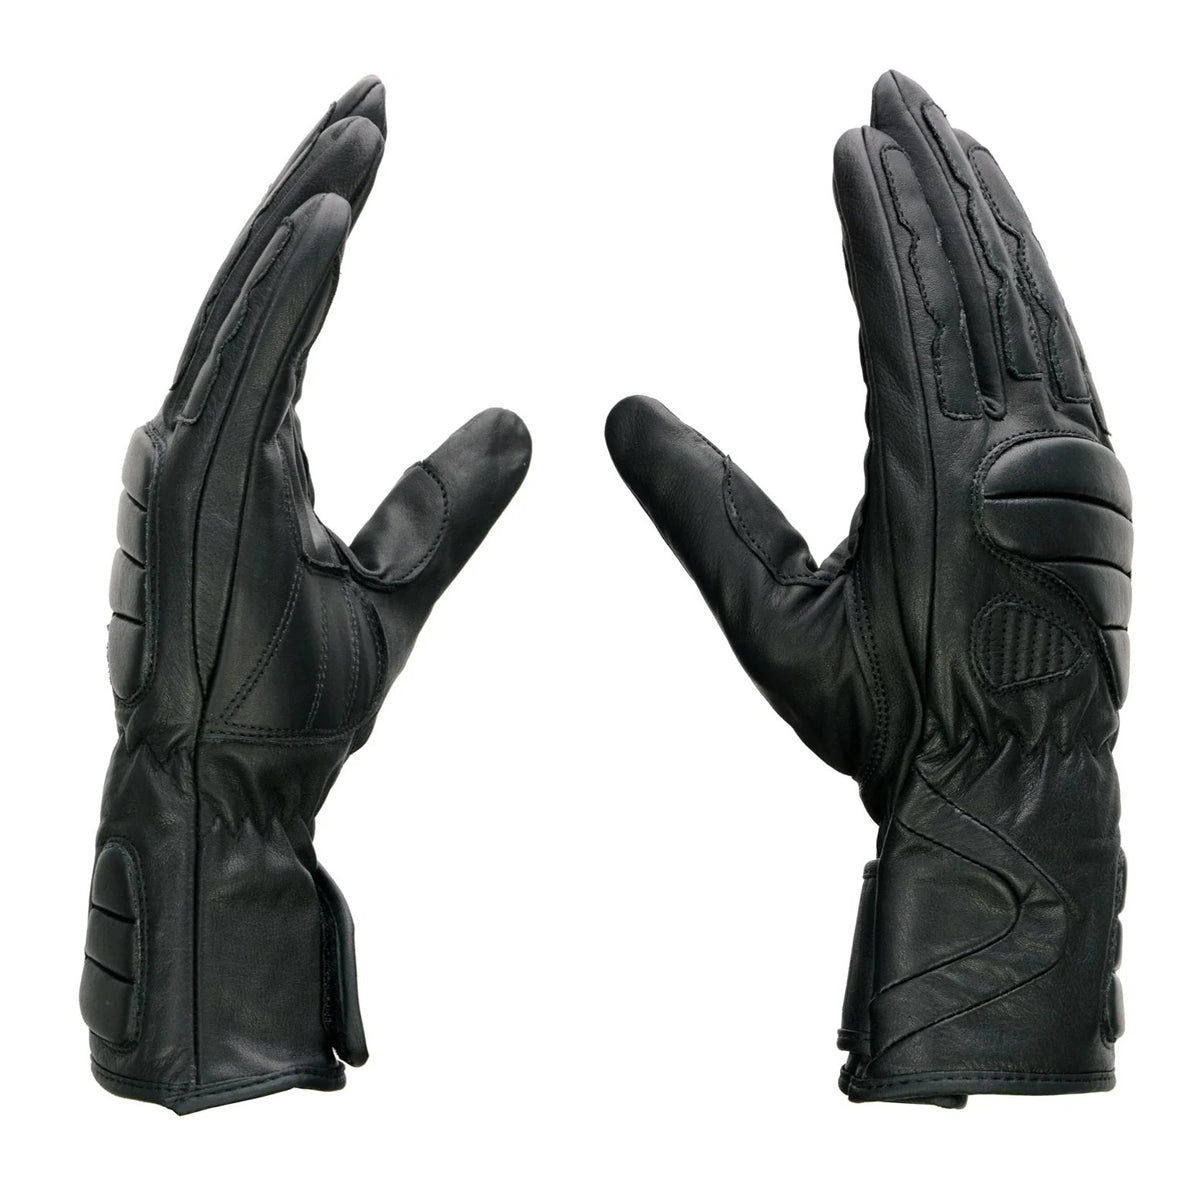 Men's Black Leather Gauntlet Racing Motorcycle Hand Gloves with Wrist and Knuckle Padding Protection